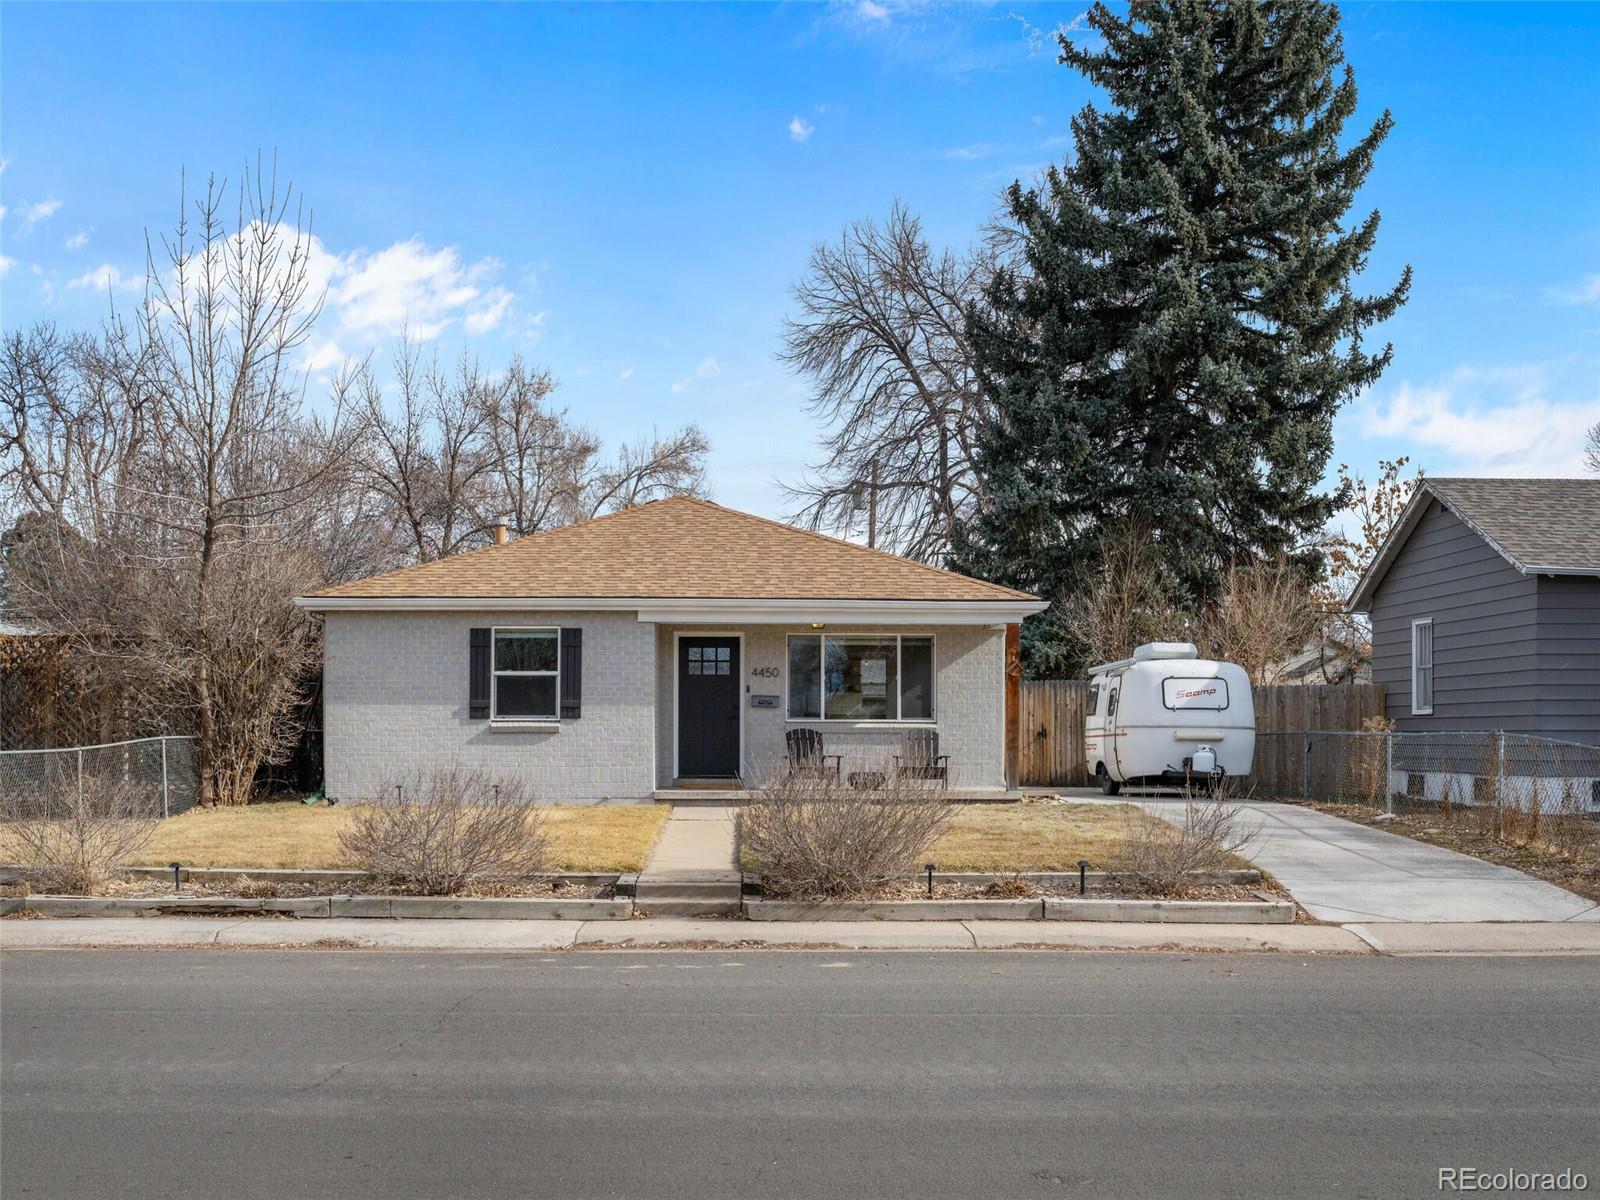 Report Image for 4450 S Sherman Street,Englewood, Colorado